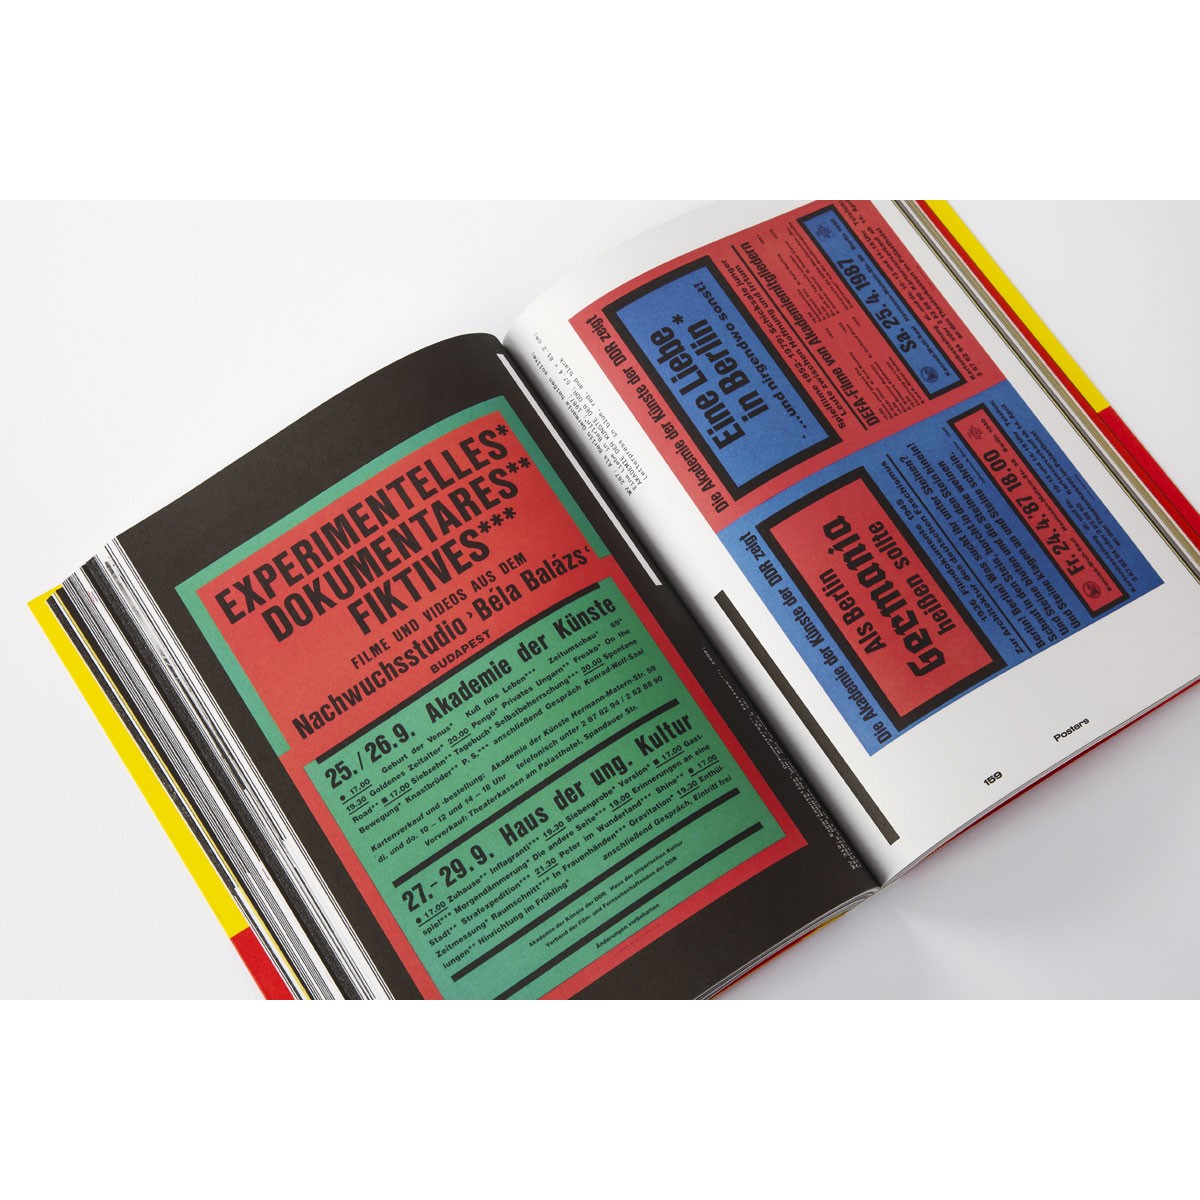 K.H. Drescher – Berlin Typo Posters, Texts, and Interviews (Slanted Publishers)